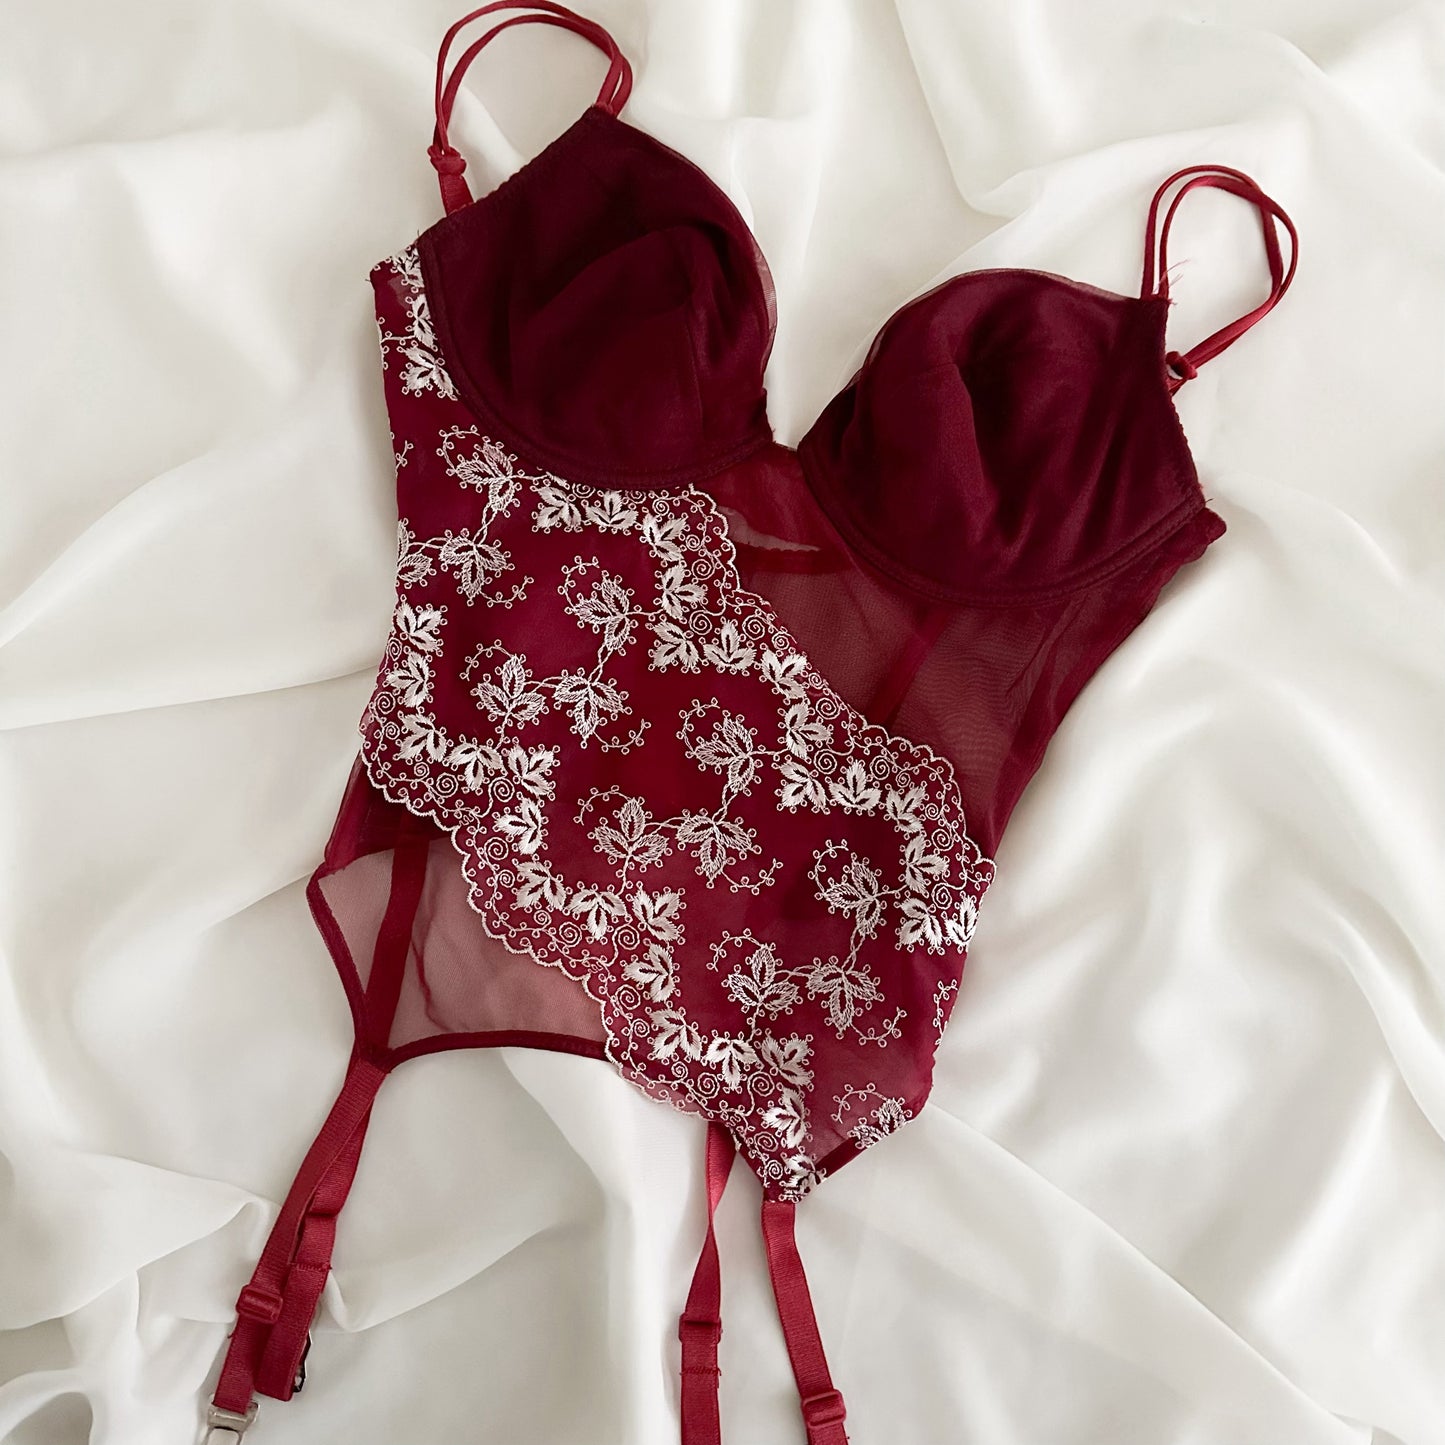 WINE RED EMBROIDERY BUSTIER (80C/85B)